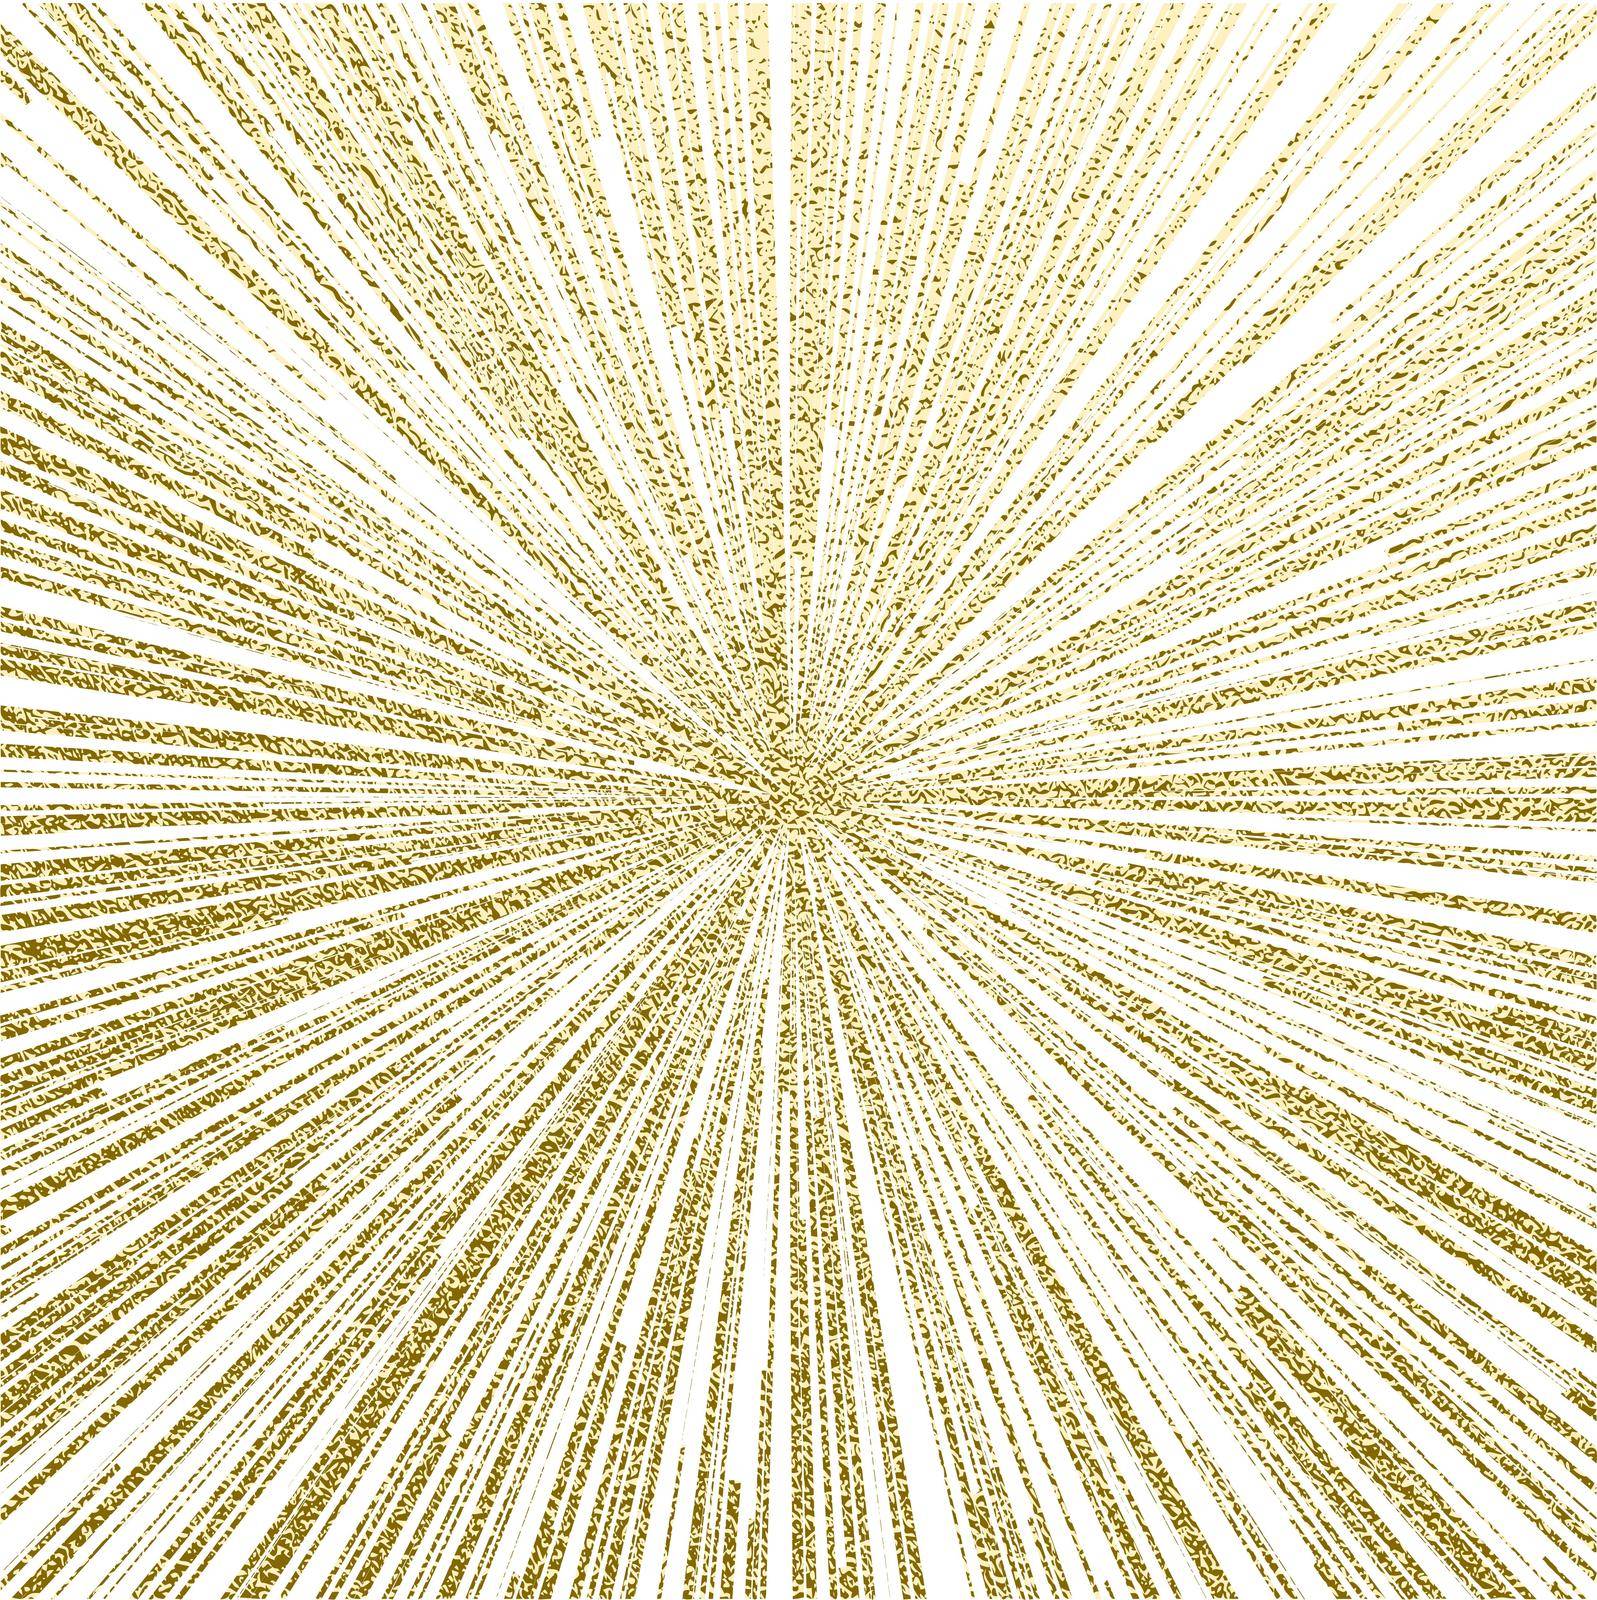 Explosion vector illustration. Sun ray or star burst element with sparkles. Gold Christmas element for greeting cards, posters. Golden glow glitter. Light rays effect.